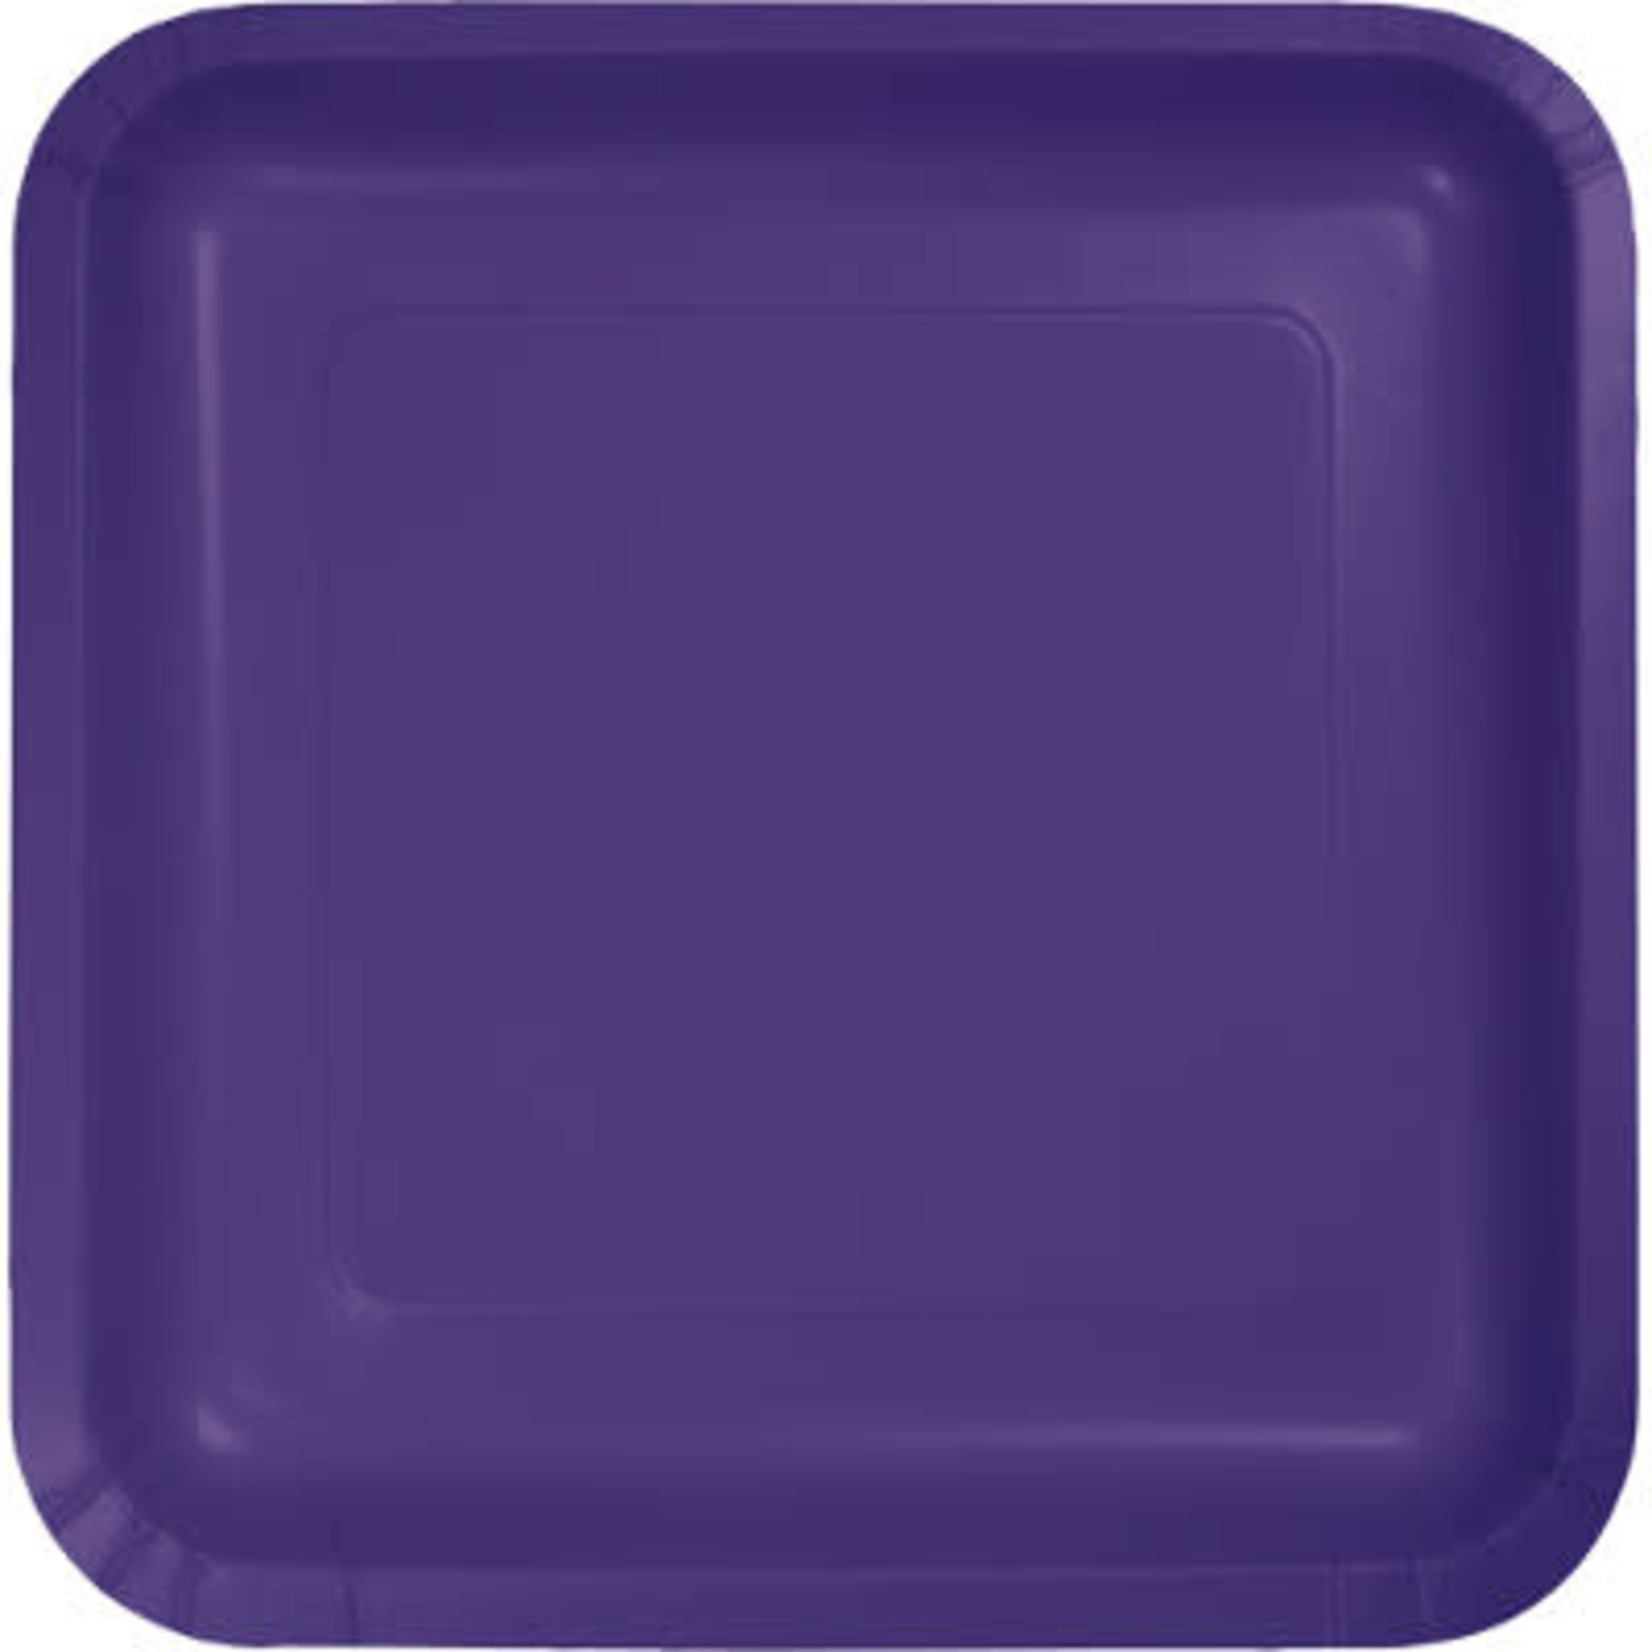 Touch of Color 9" Purple Square Plates - 18ct.